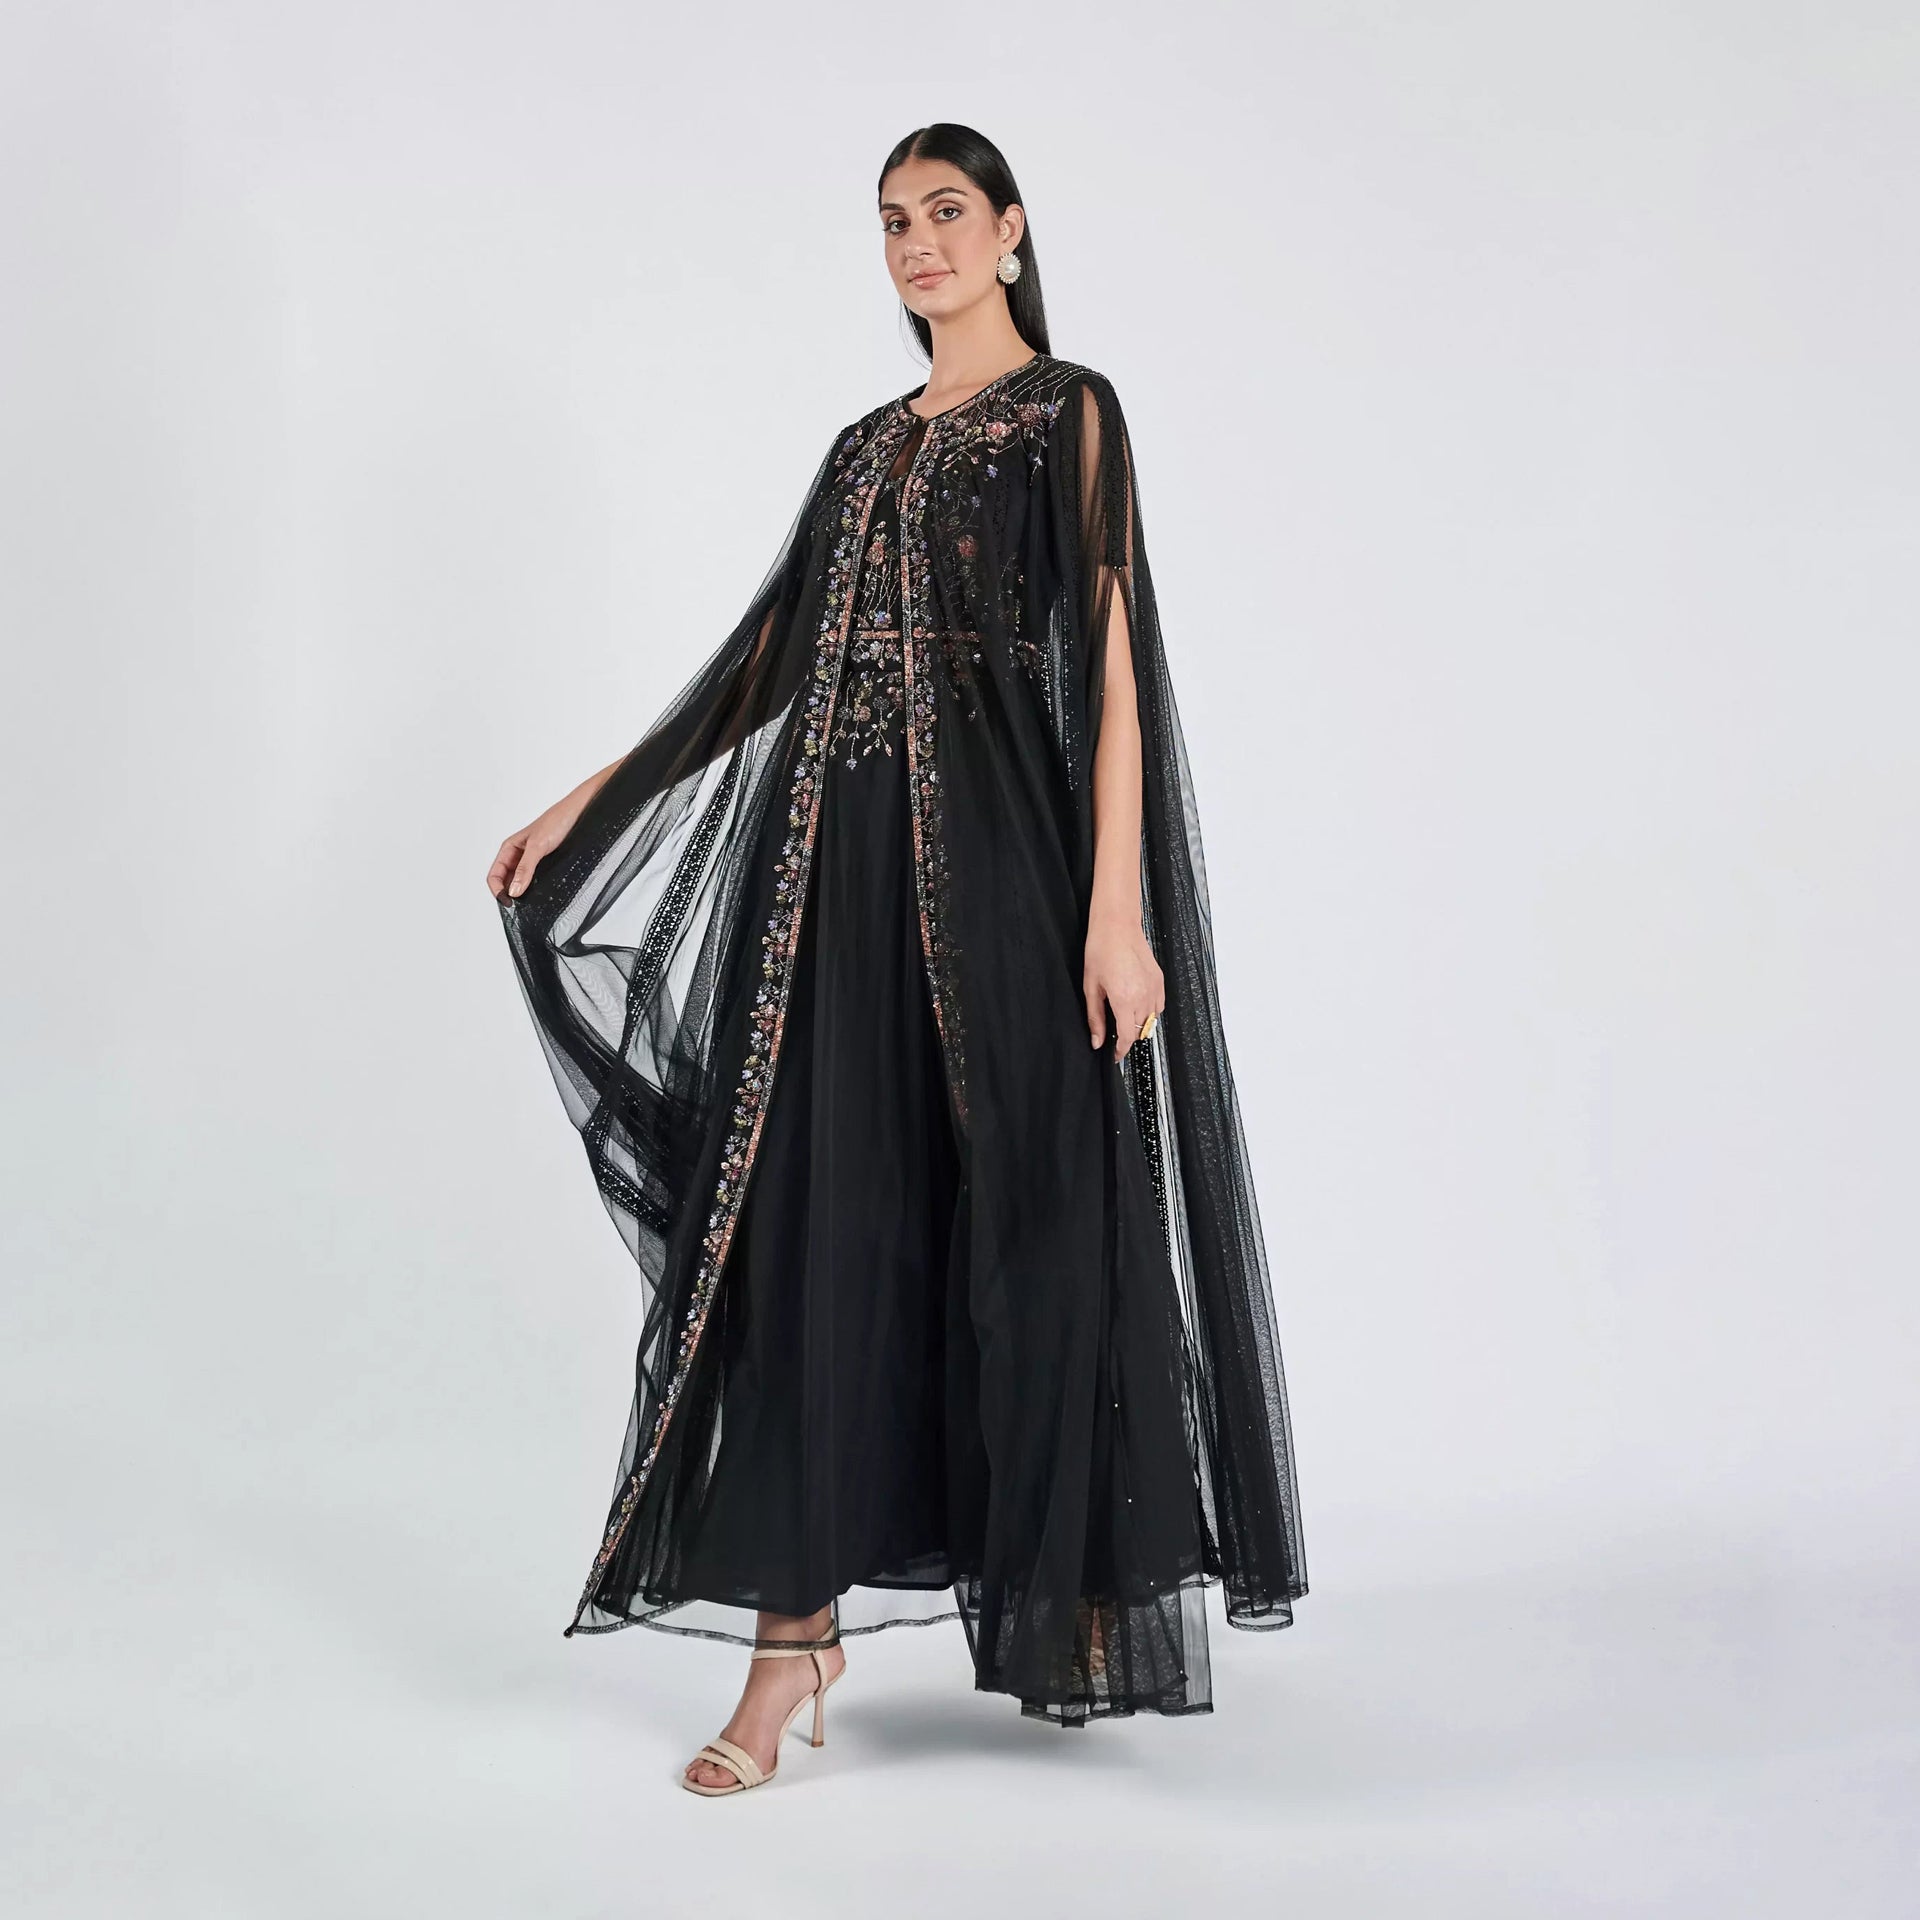 Black Nouran Dress From Shalky